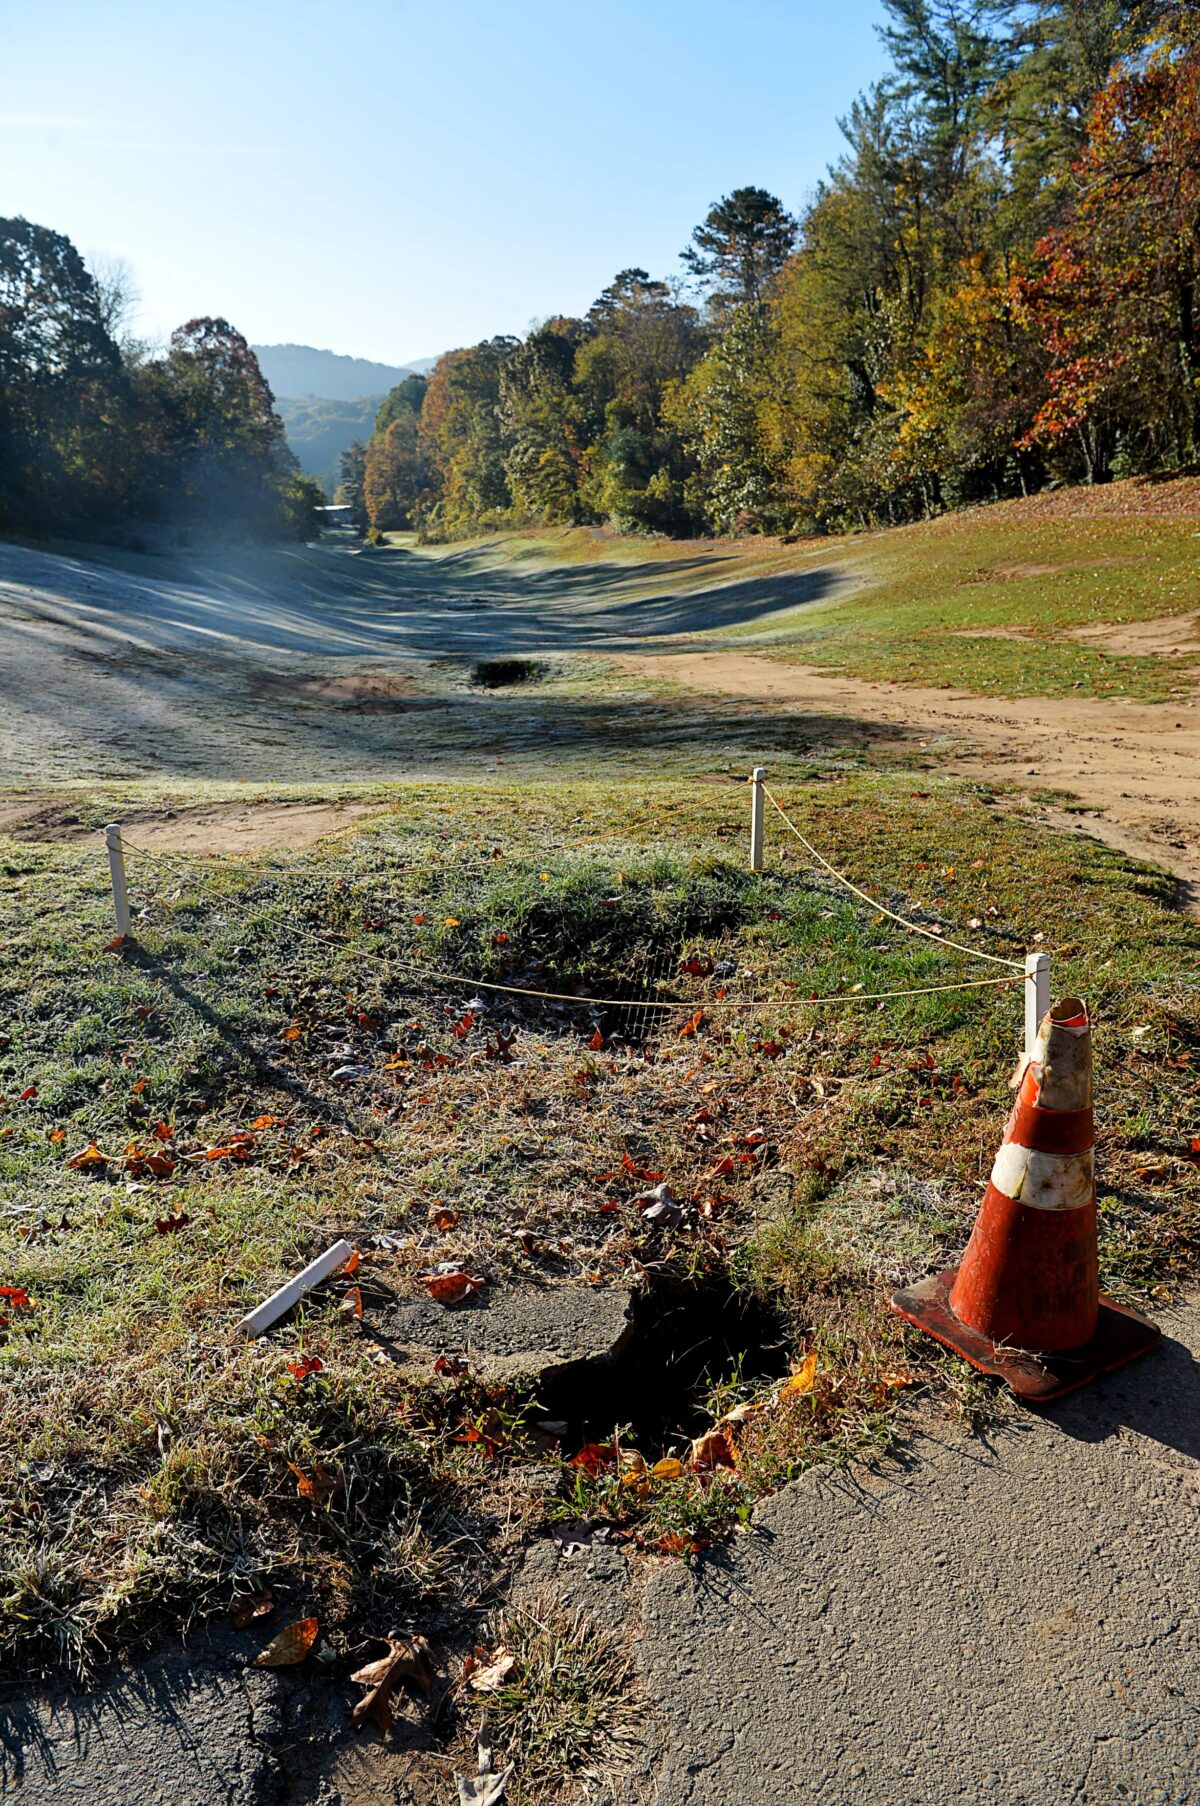 North Carolina city with Donald Ross municipal course that’s ‘overrun’ and ‘overgrown’ files $340K suit against management company